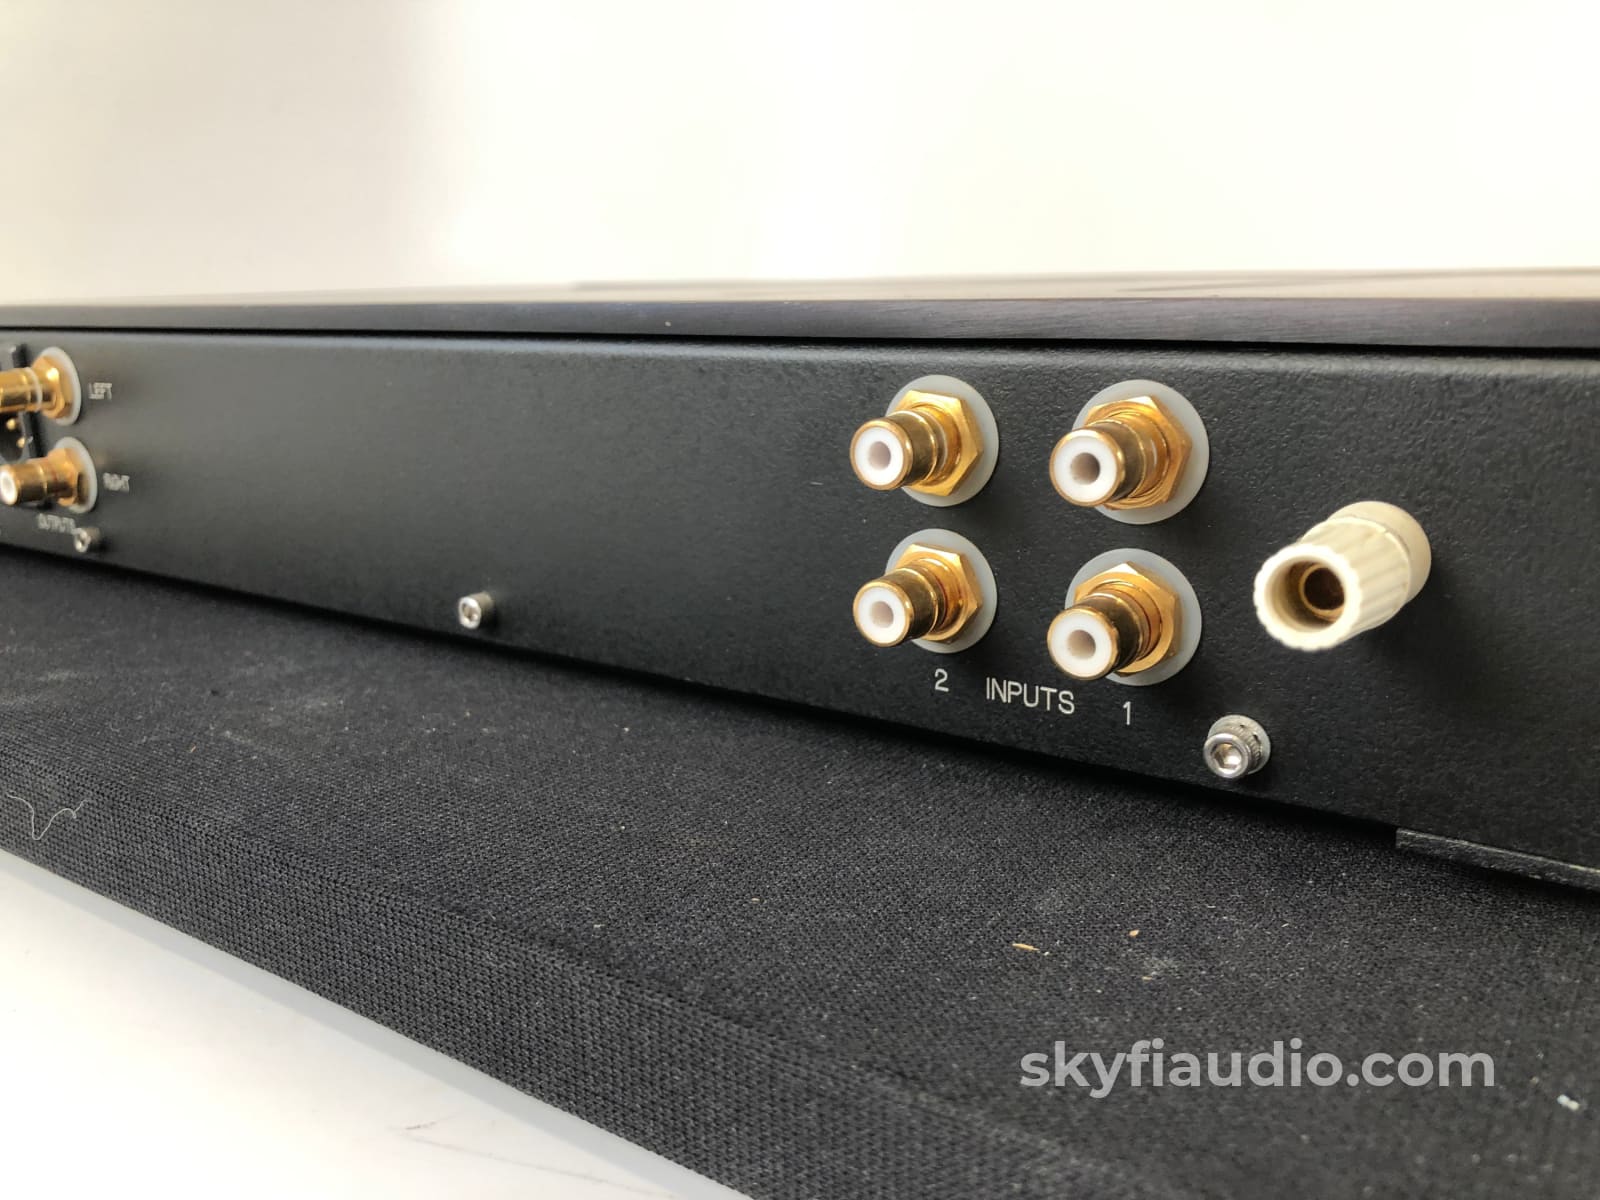 Krell Kbl + Kpa Preamp/Phono Preamp Combo With Power Supply - Stereophile Class A Duo Preamplifier